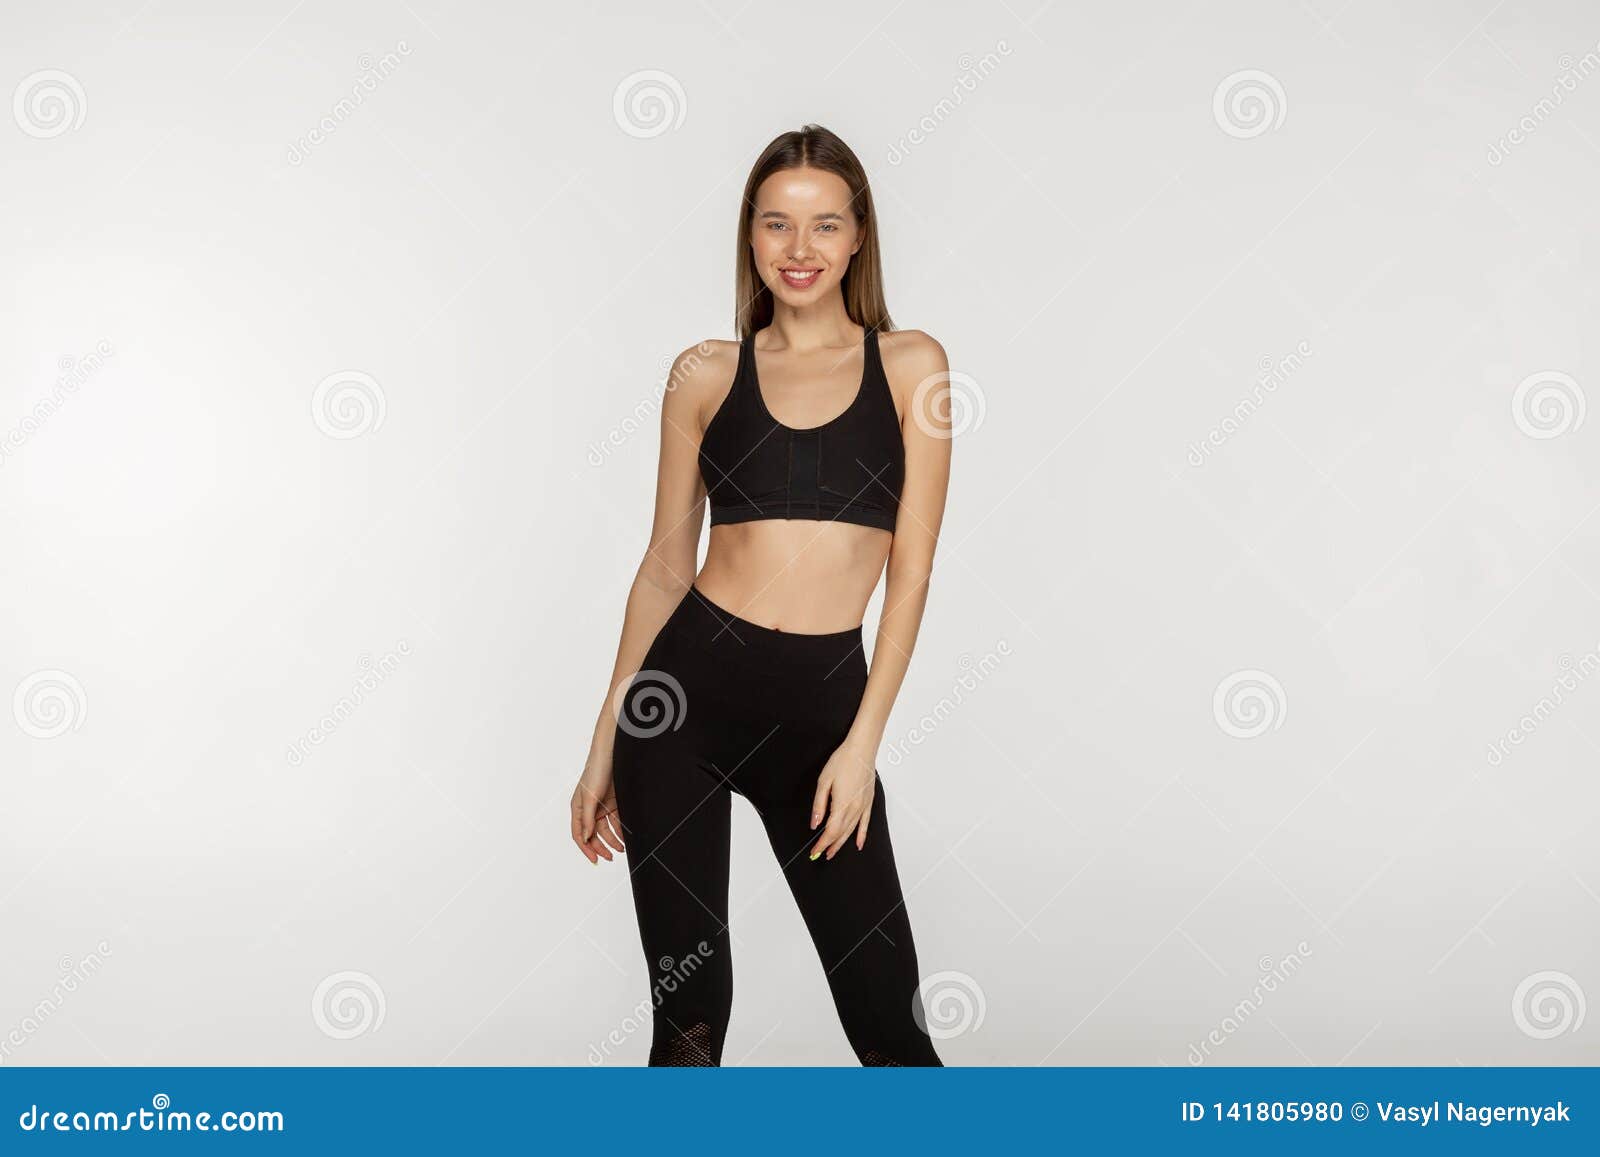 Young Slim Girl in a Black Tight Suit for Yoga and Fitness Stock Photo -  Image of action, person: 141805980